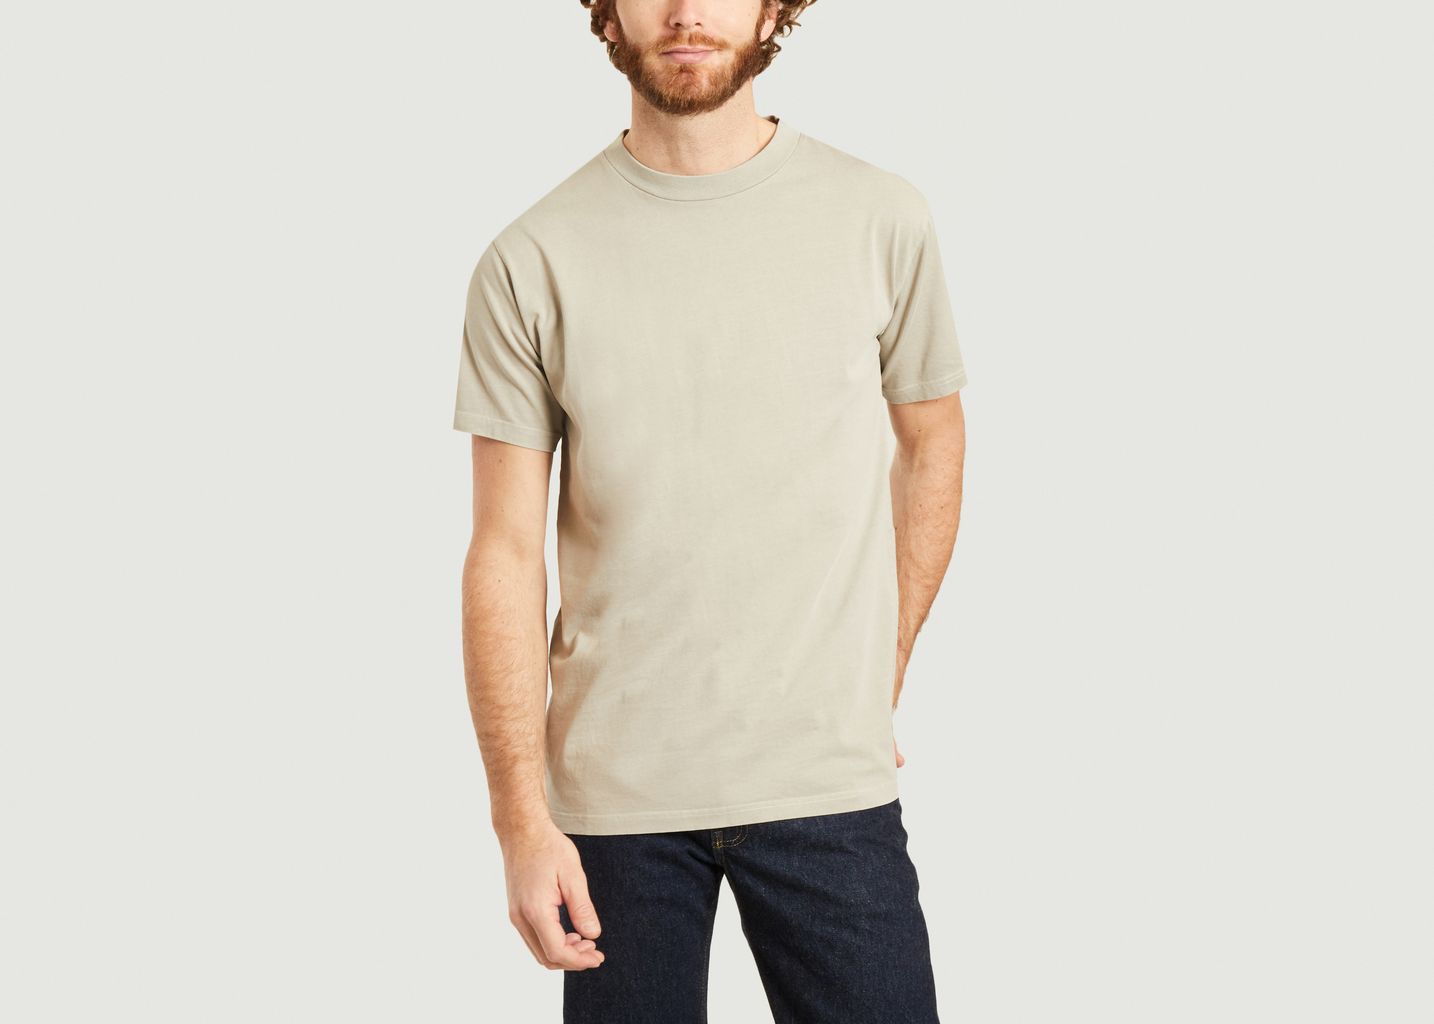 Fizalley T-shirt - American Vintage